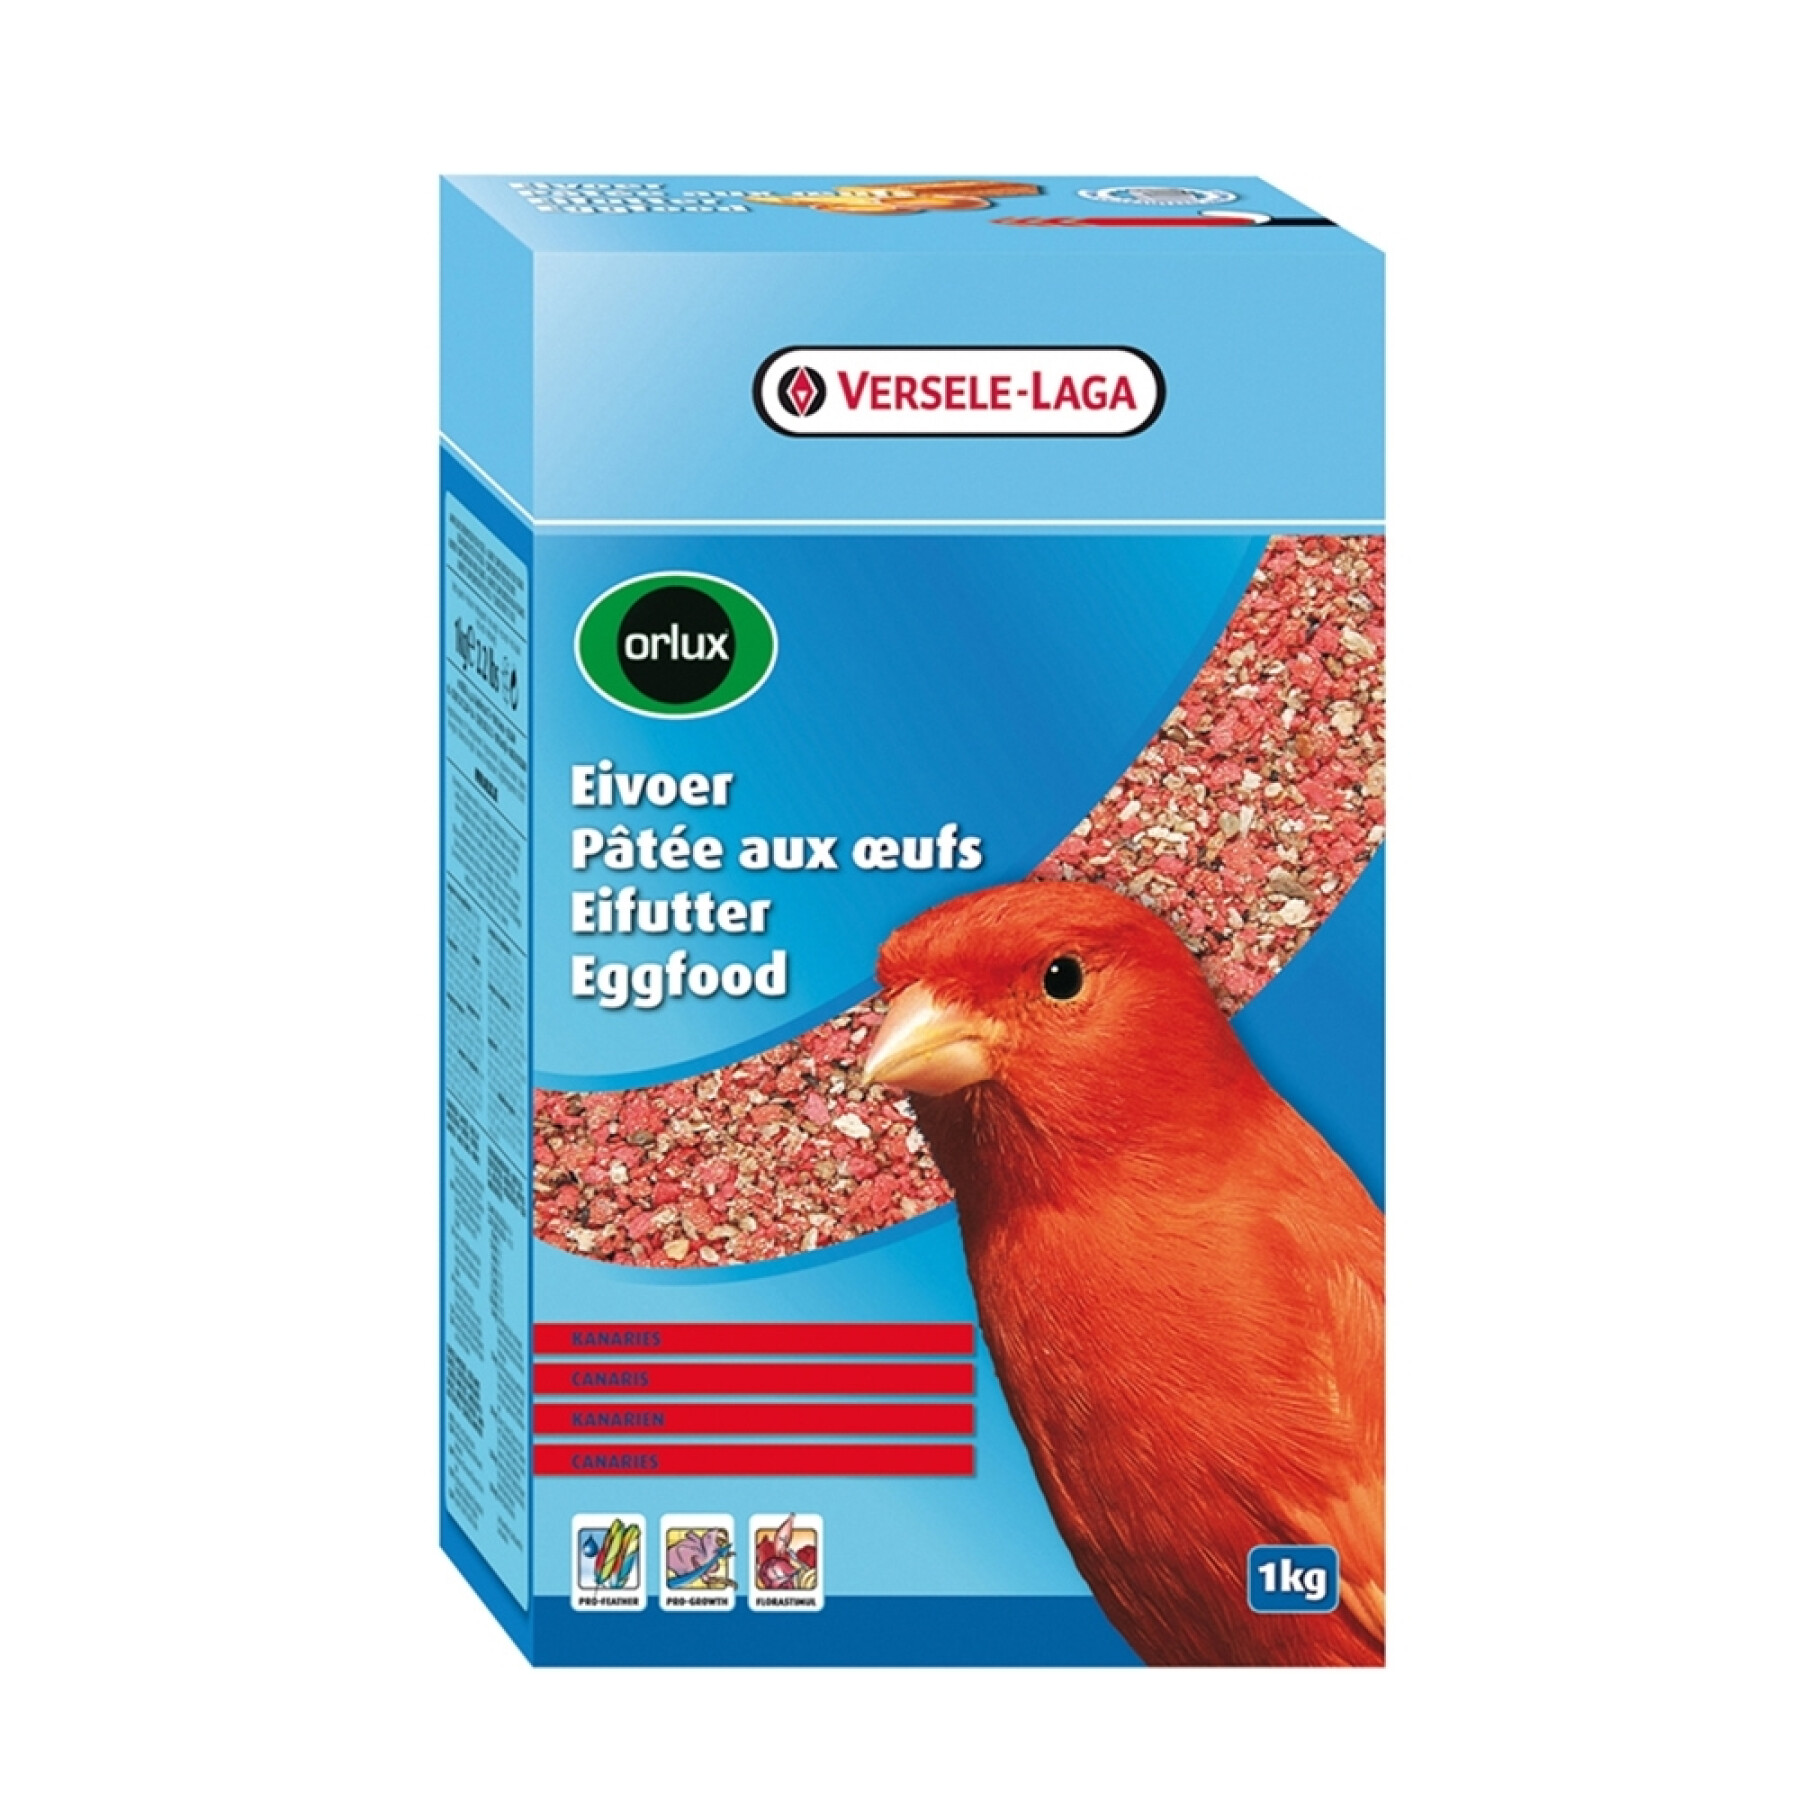 Food supplement for canary birds Nobby Pet Orlux